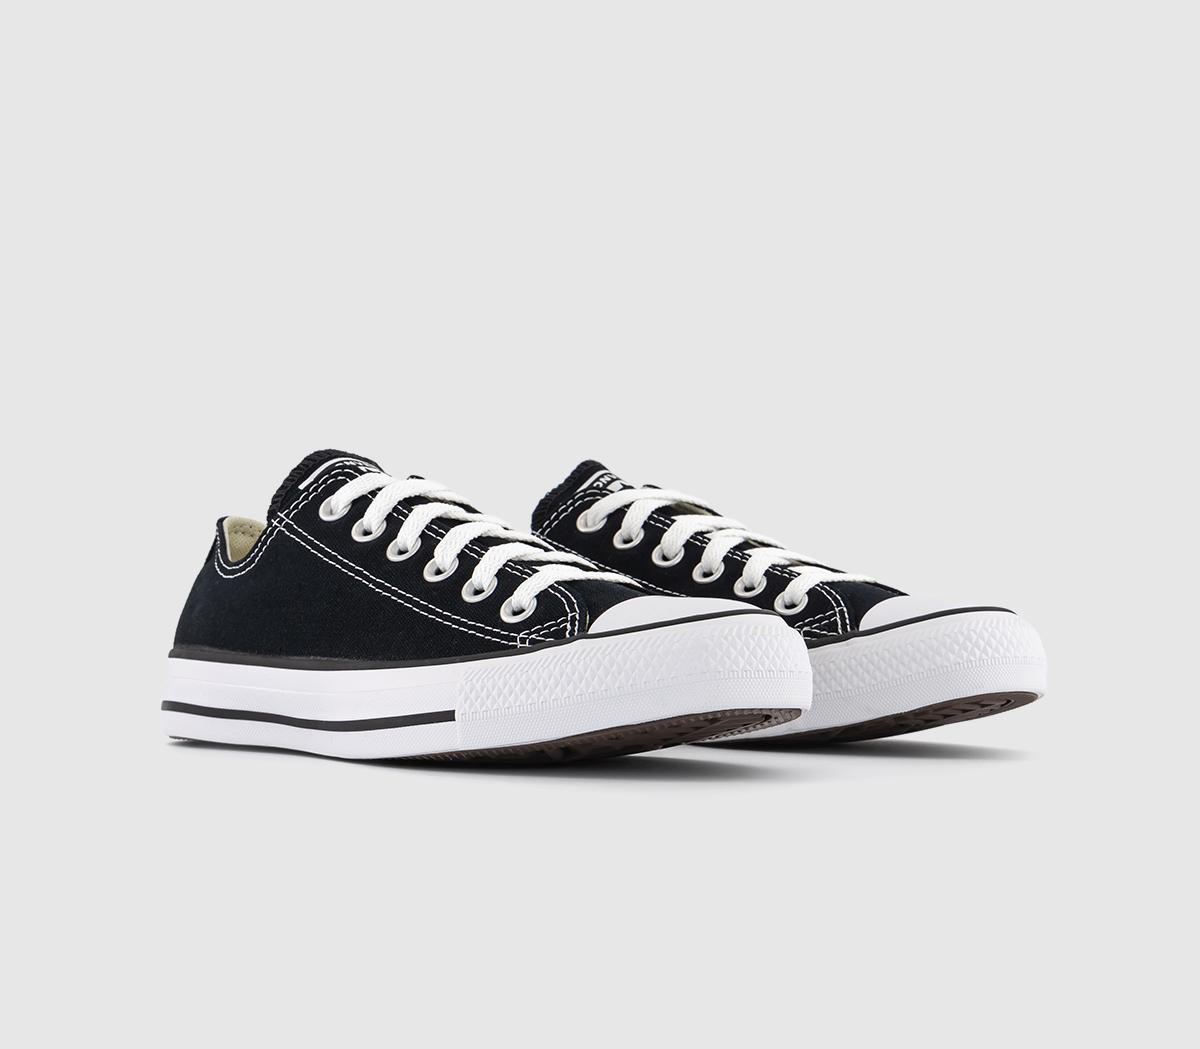 Mens Converse All Star Low Black Canvas Trainers Black/White, 7.5